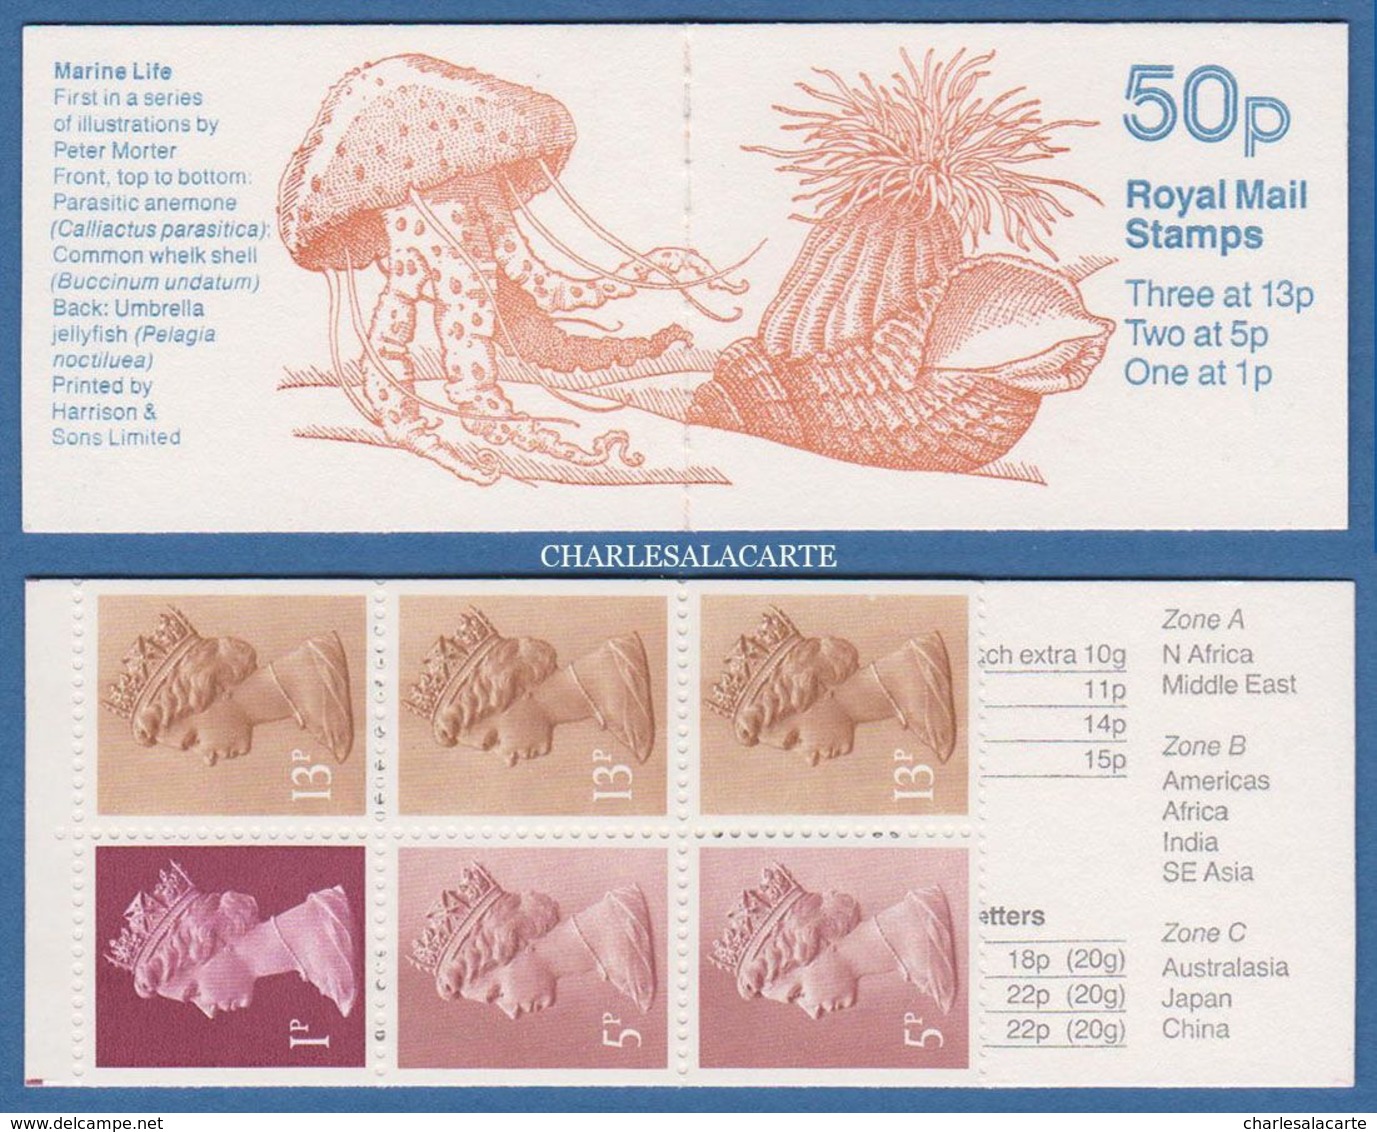 GREAT BRITAIN 1988 FOLDED BOOKLET 50p  MARINE LIFE 1  COVER  S.G. FB 50 - Carnets